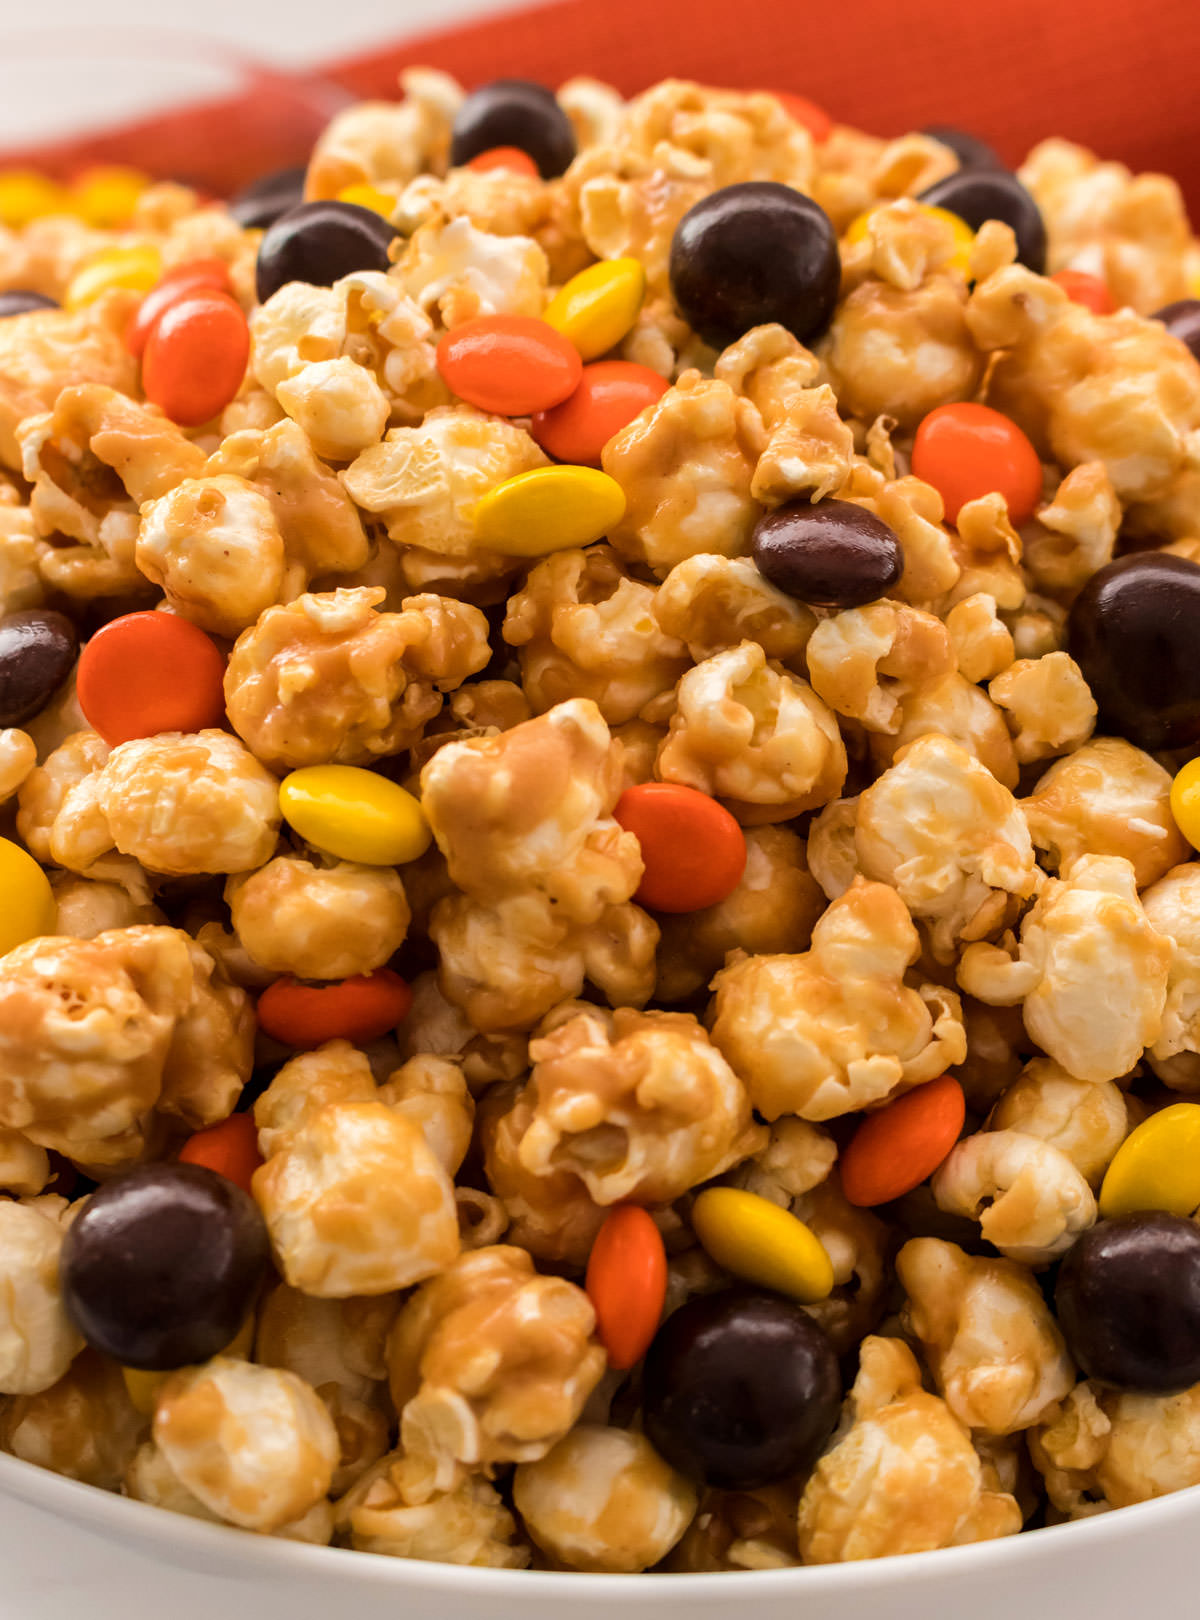 Closeup on a white serving bowl filled with Peanut Butter Popcorn.